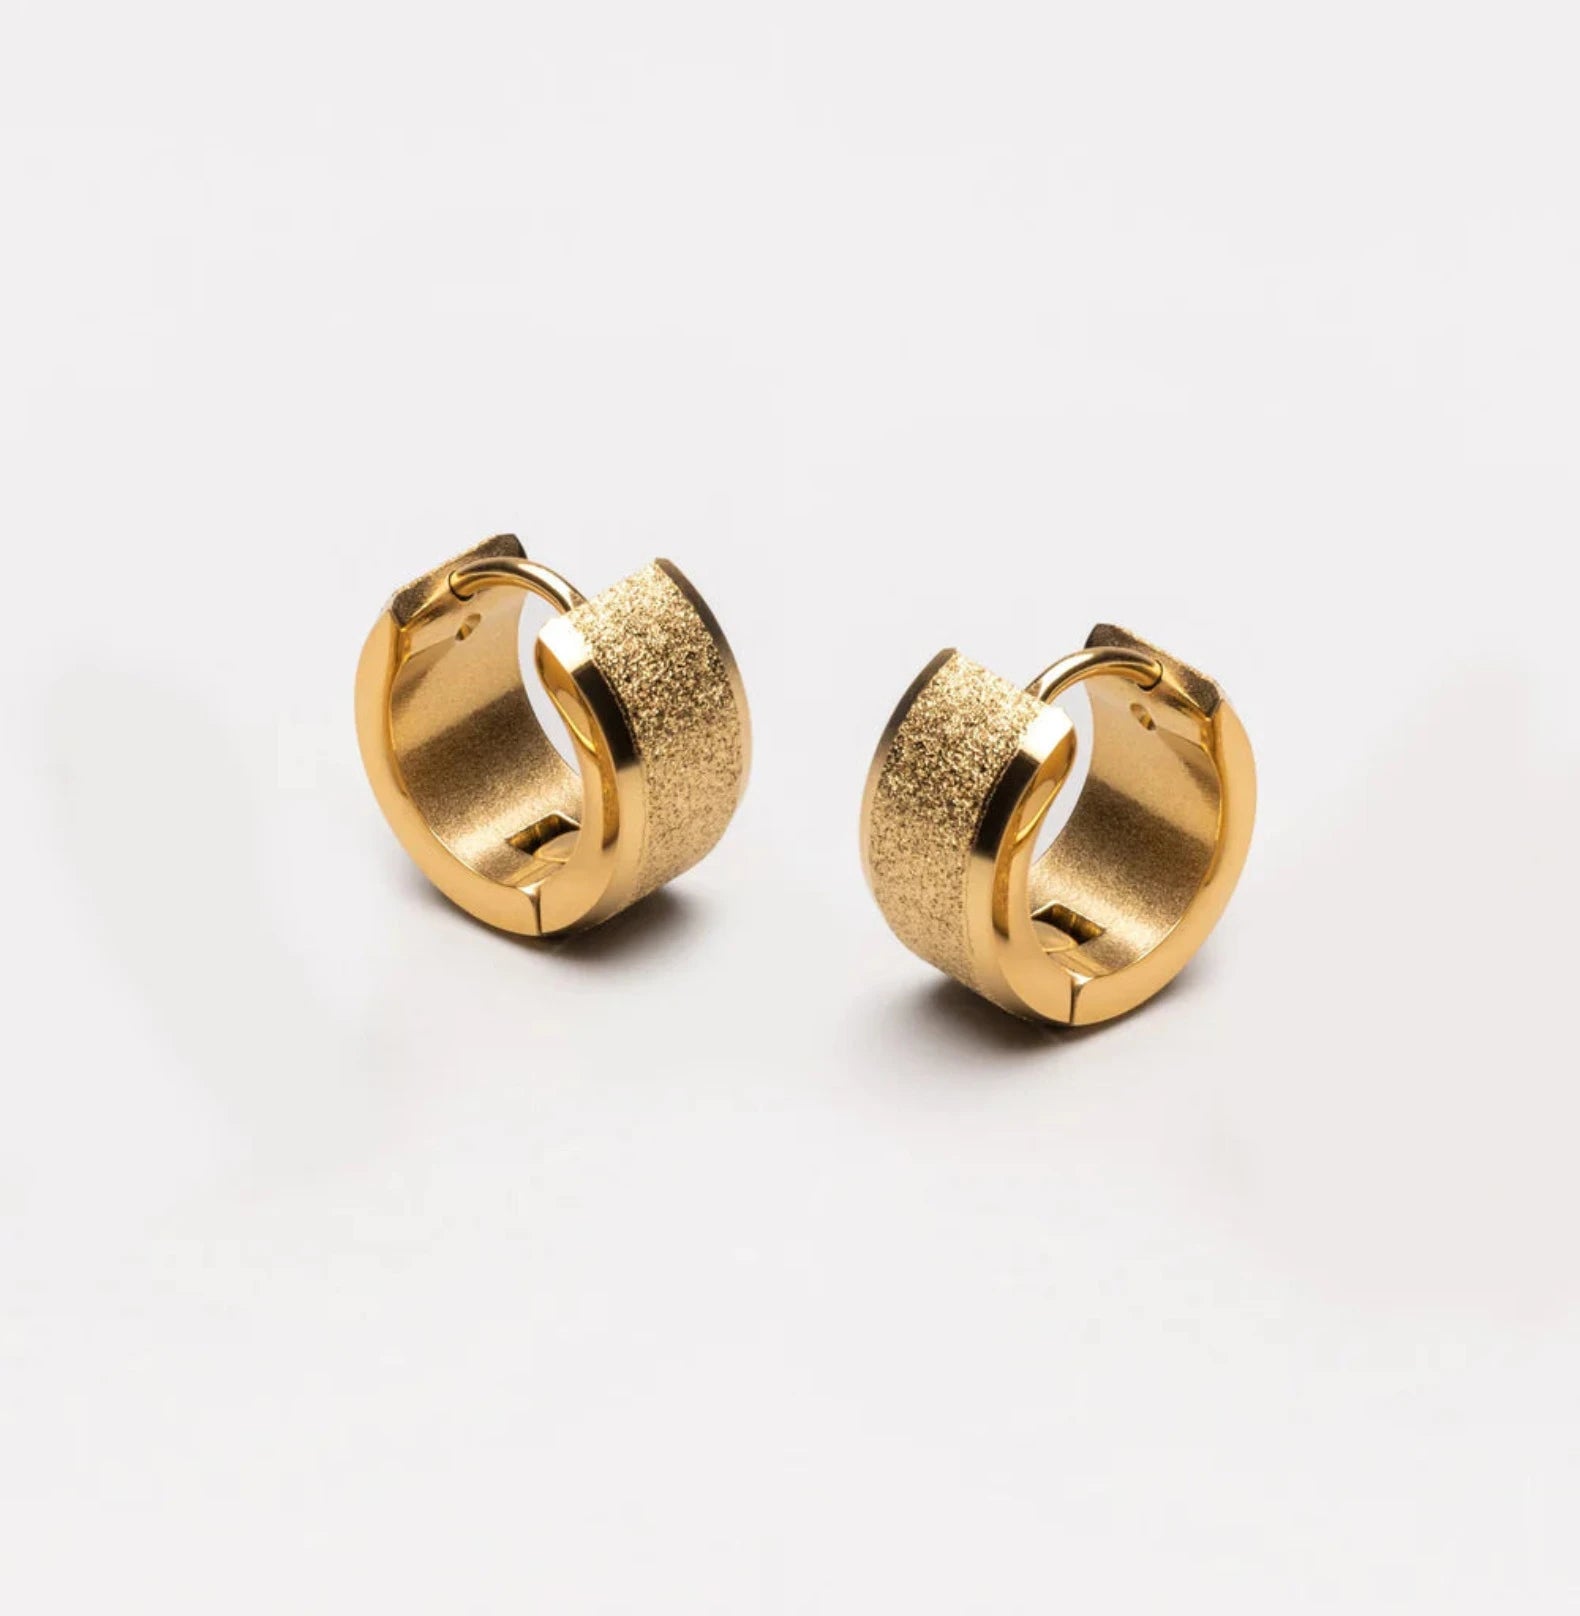 GALO EARRINGS earing Yubama Jewelry Online Store - The Elegant Designs of Gold and Silver ! 